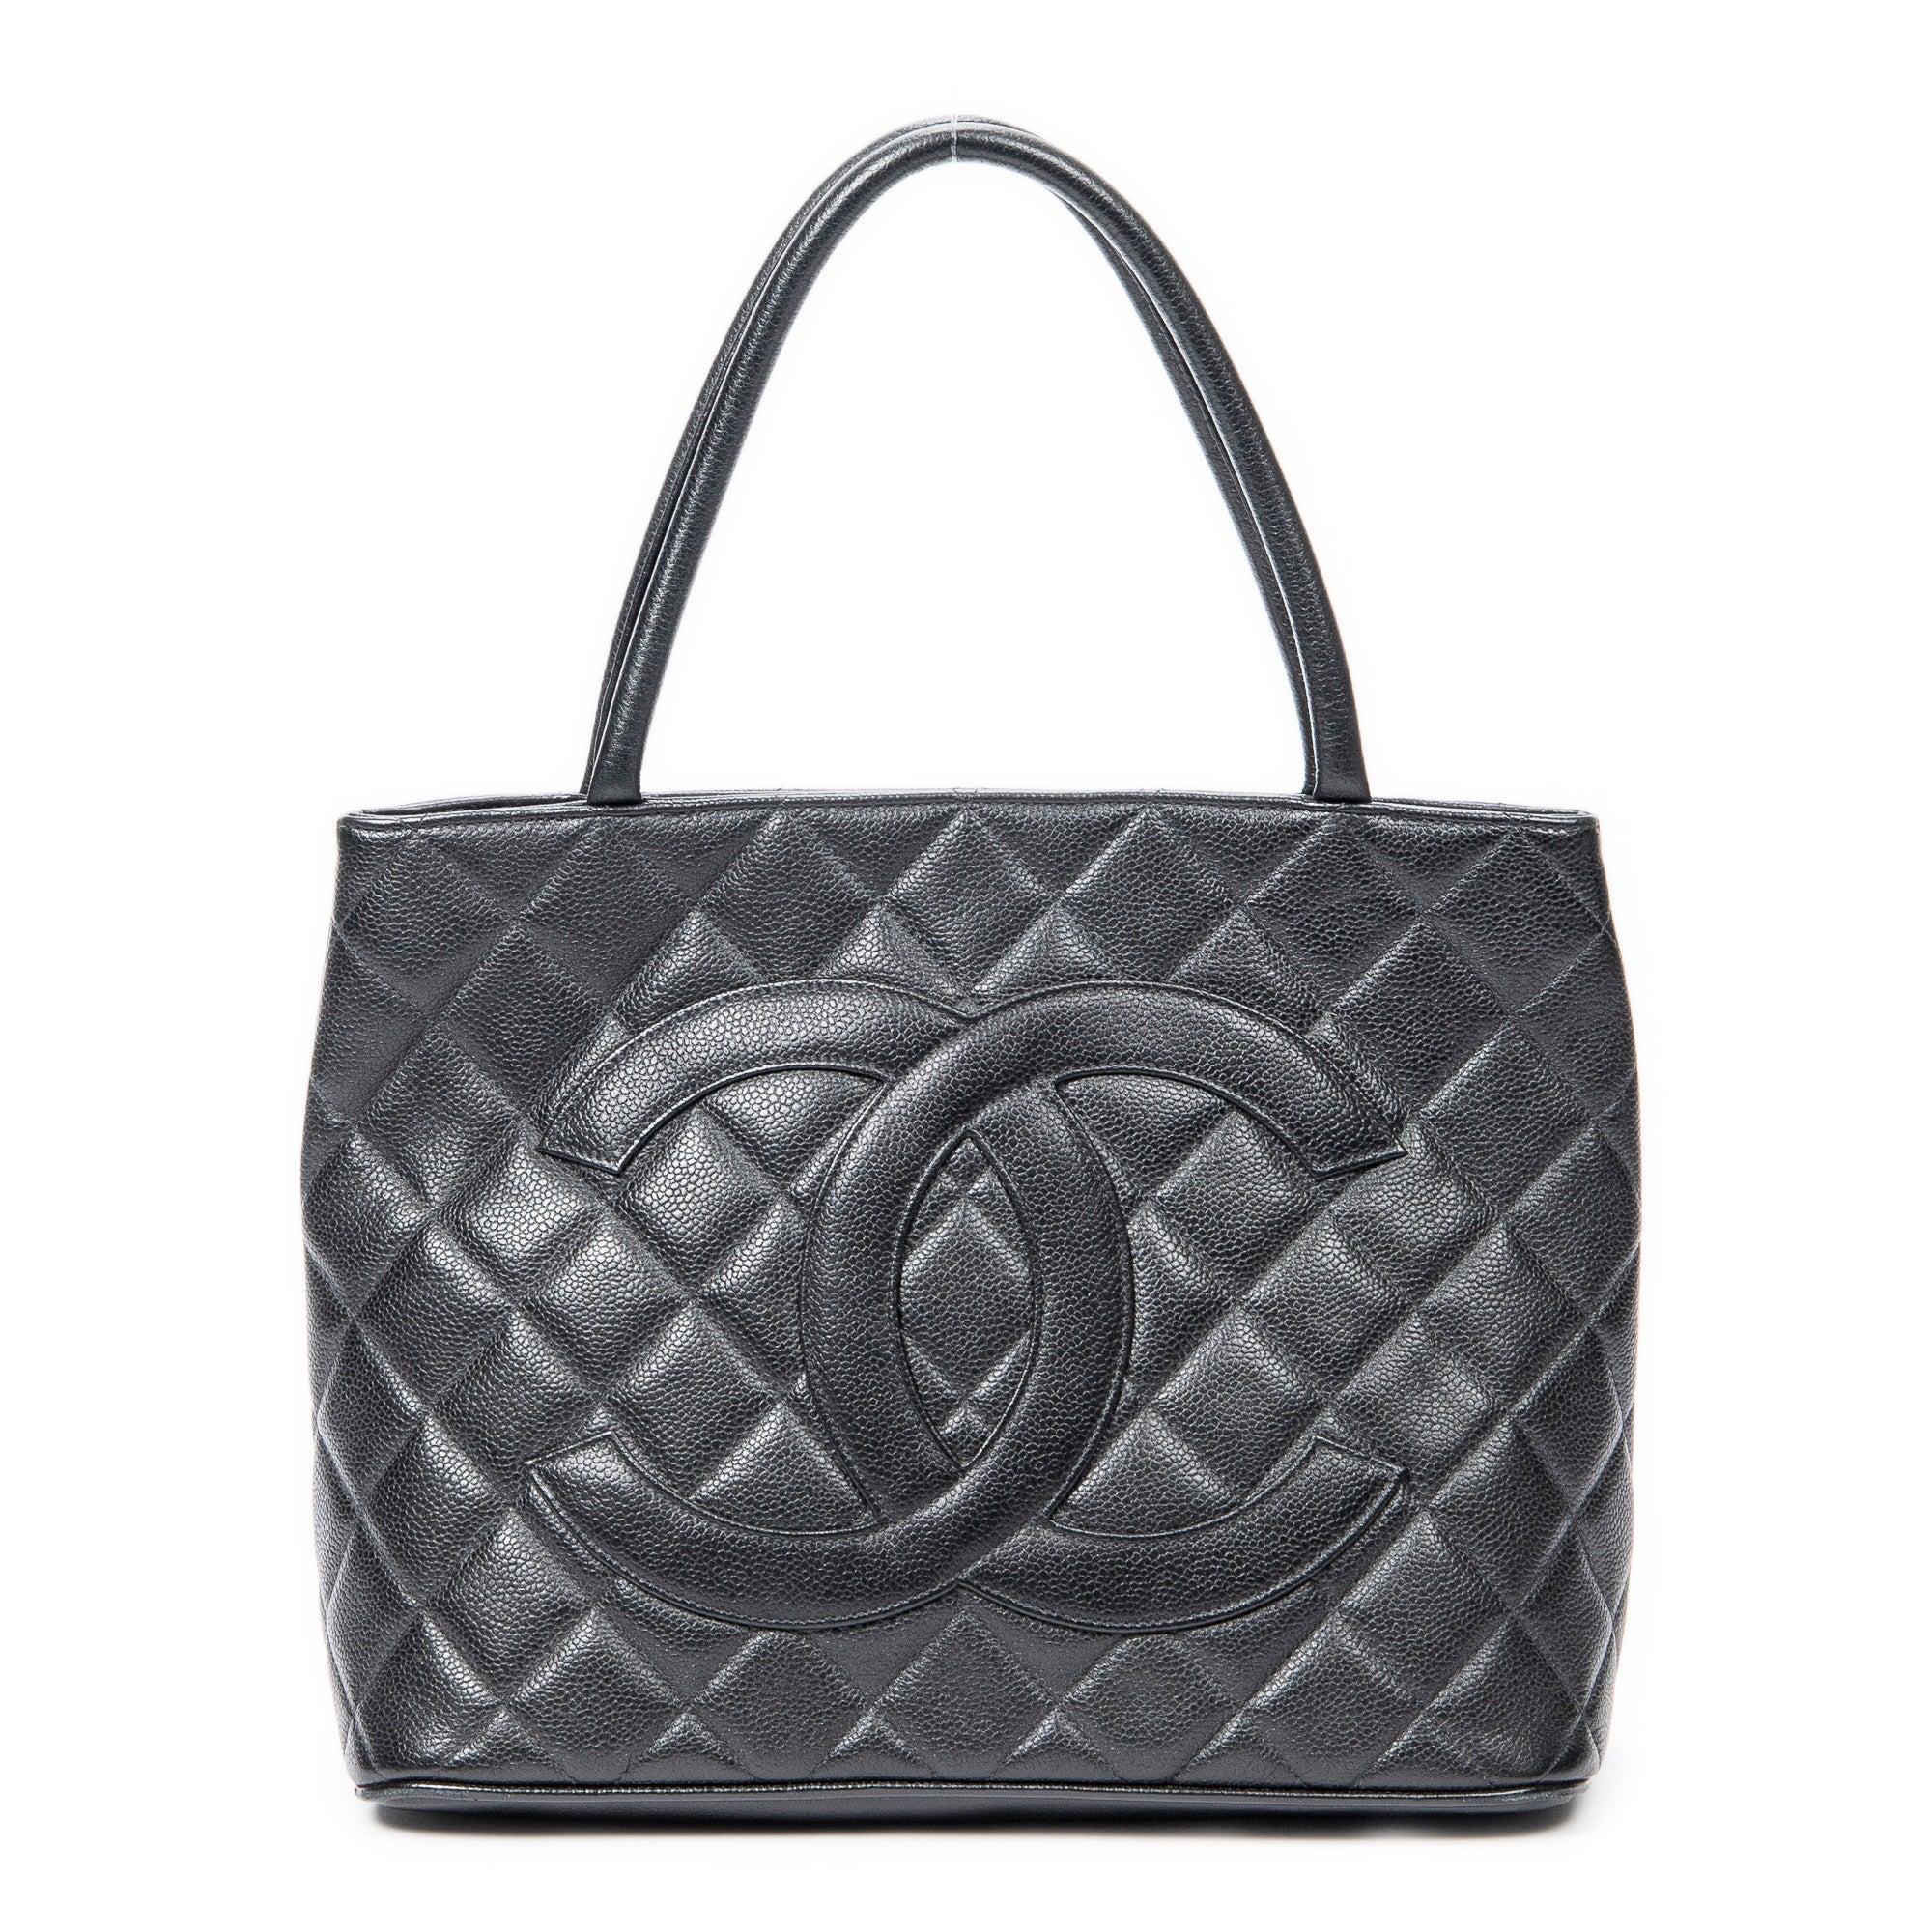 CHANEL Pre-Owned Medallion Tote Bag - Farfetch